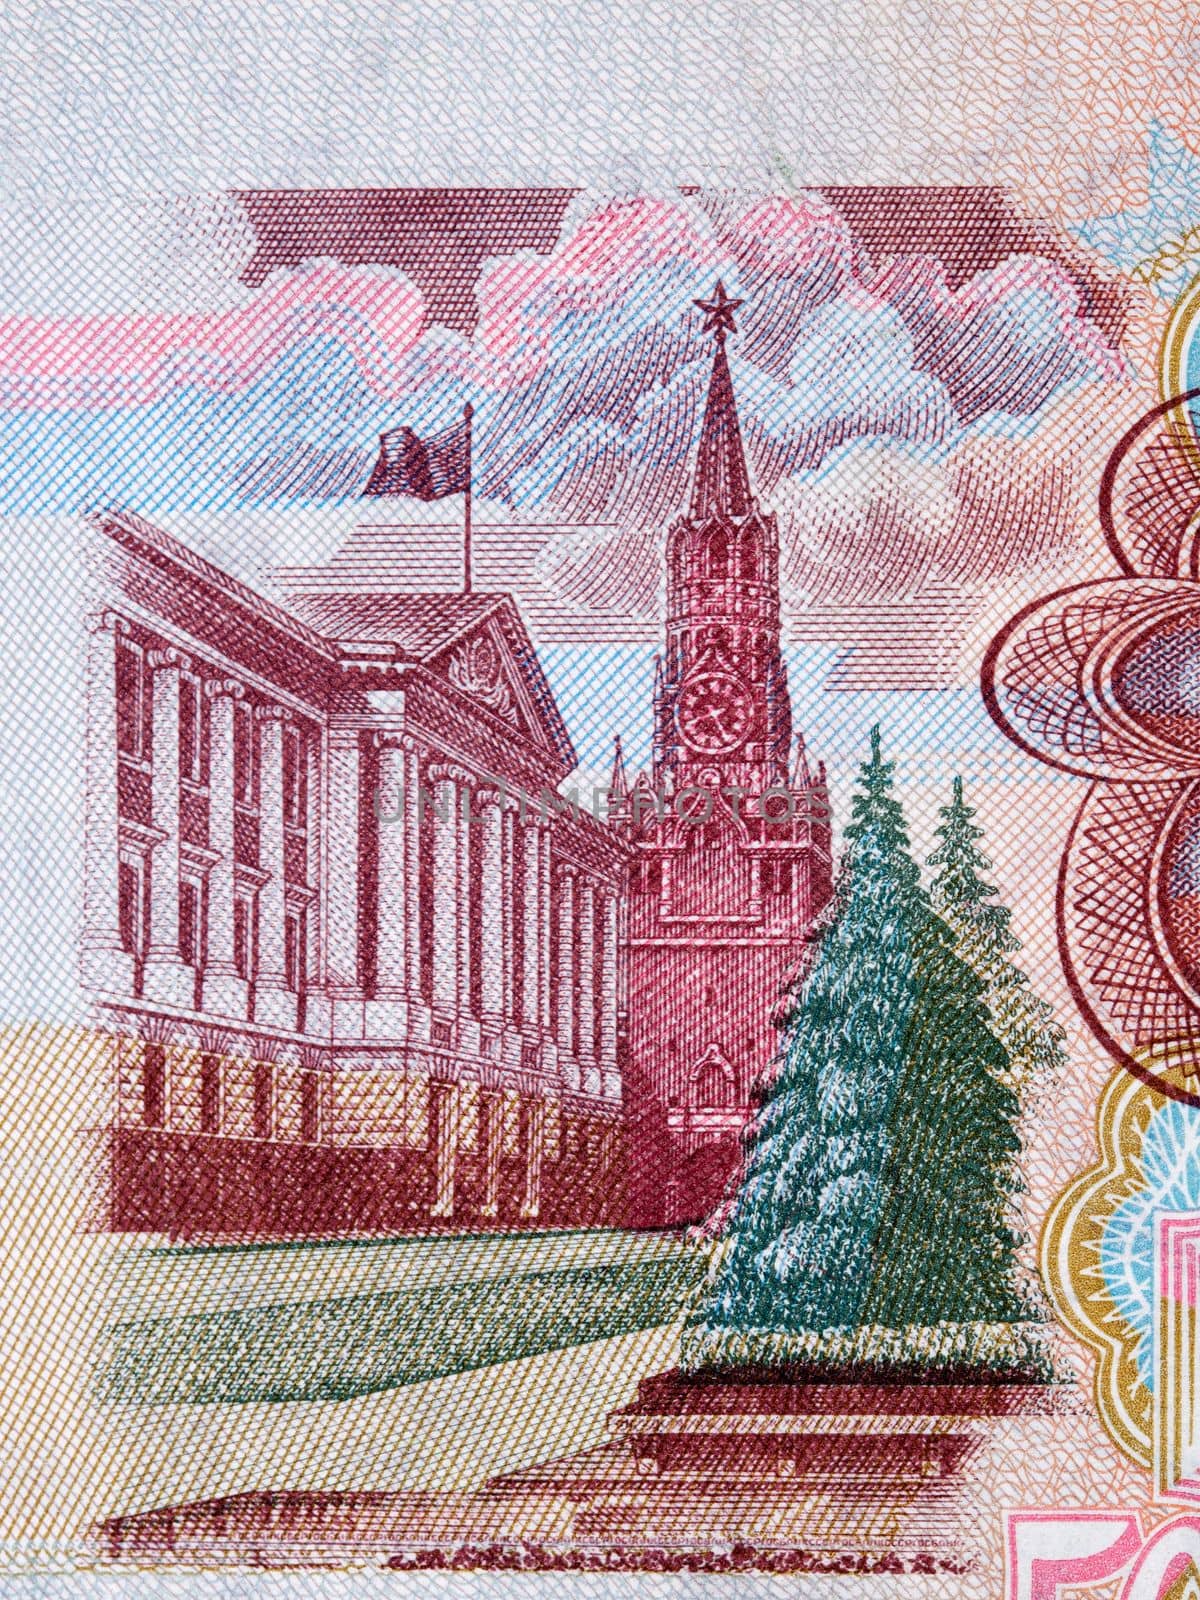 View of Kremlin from Russian money - ruble